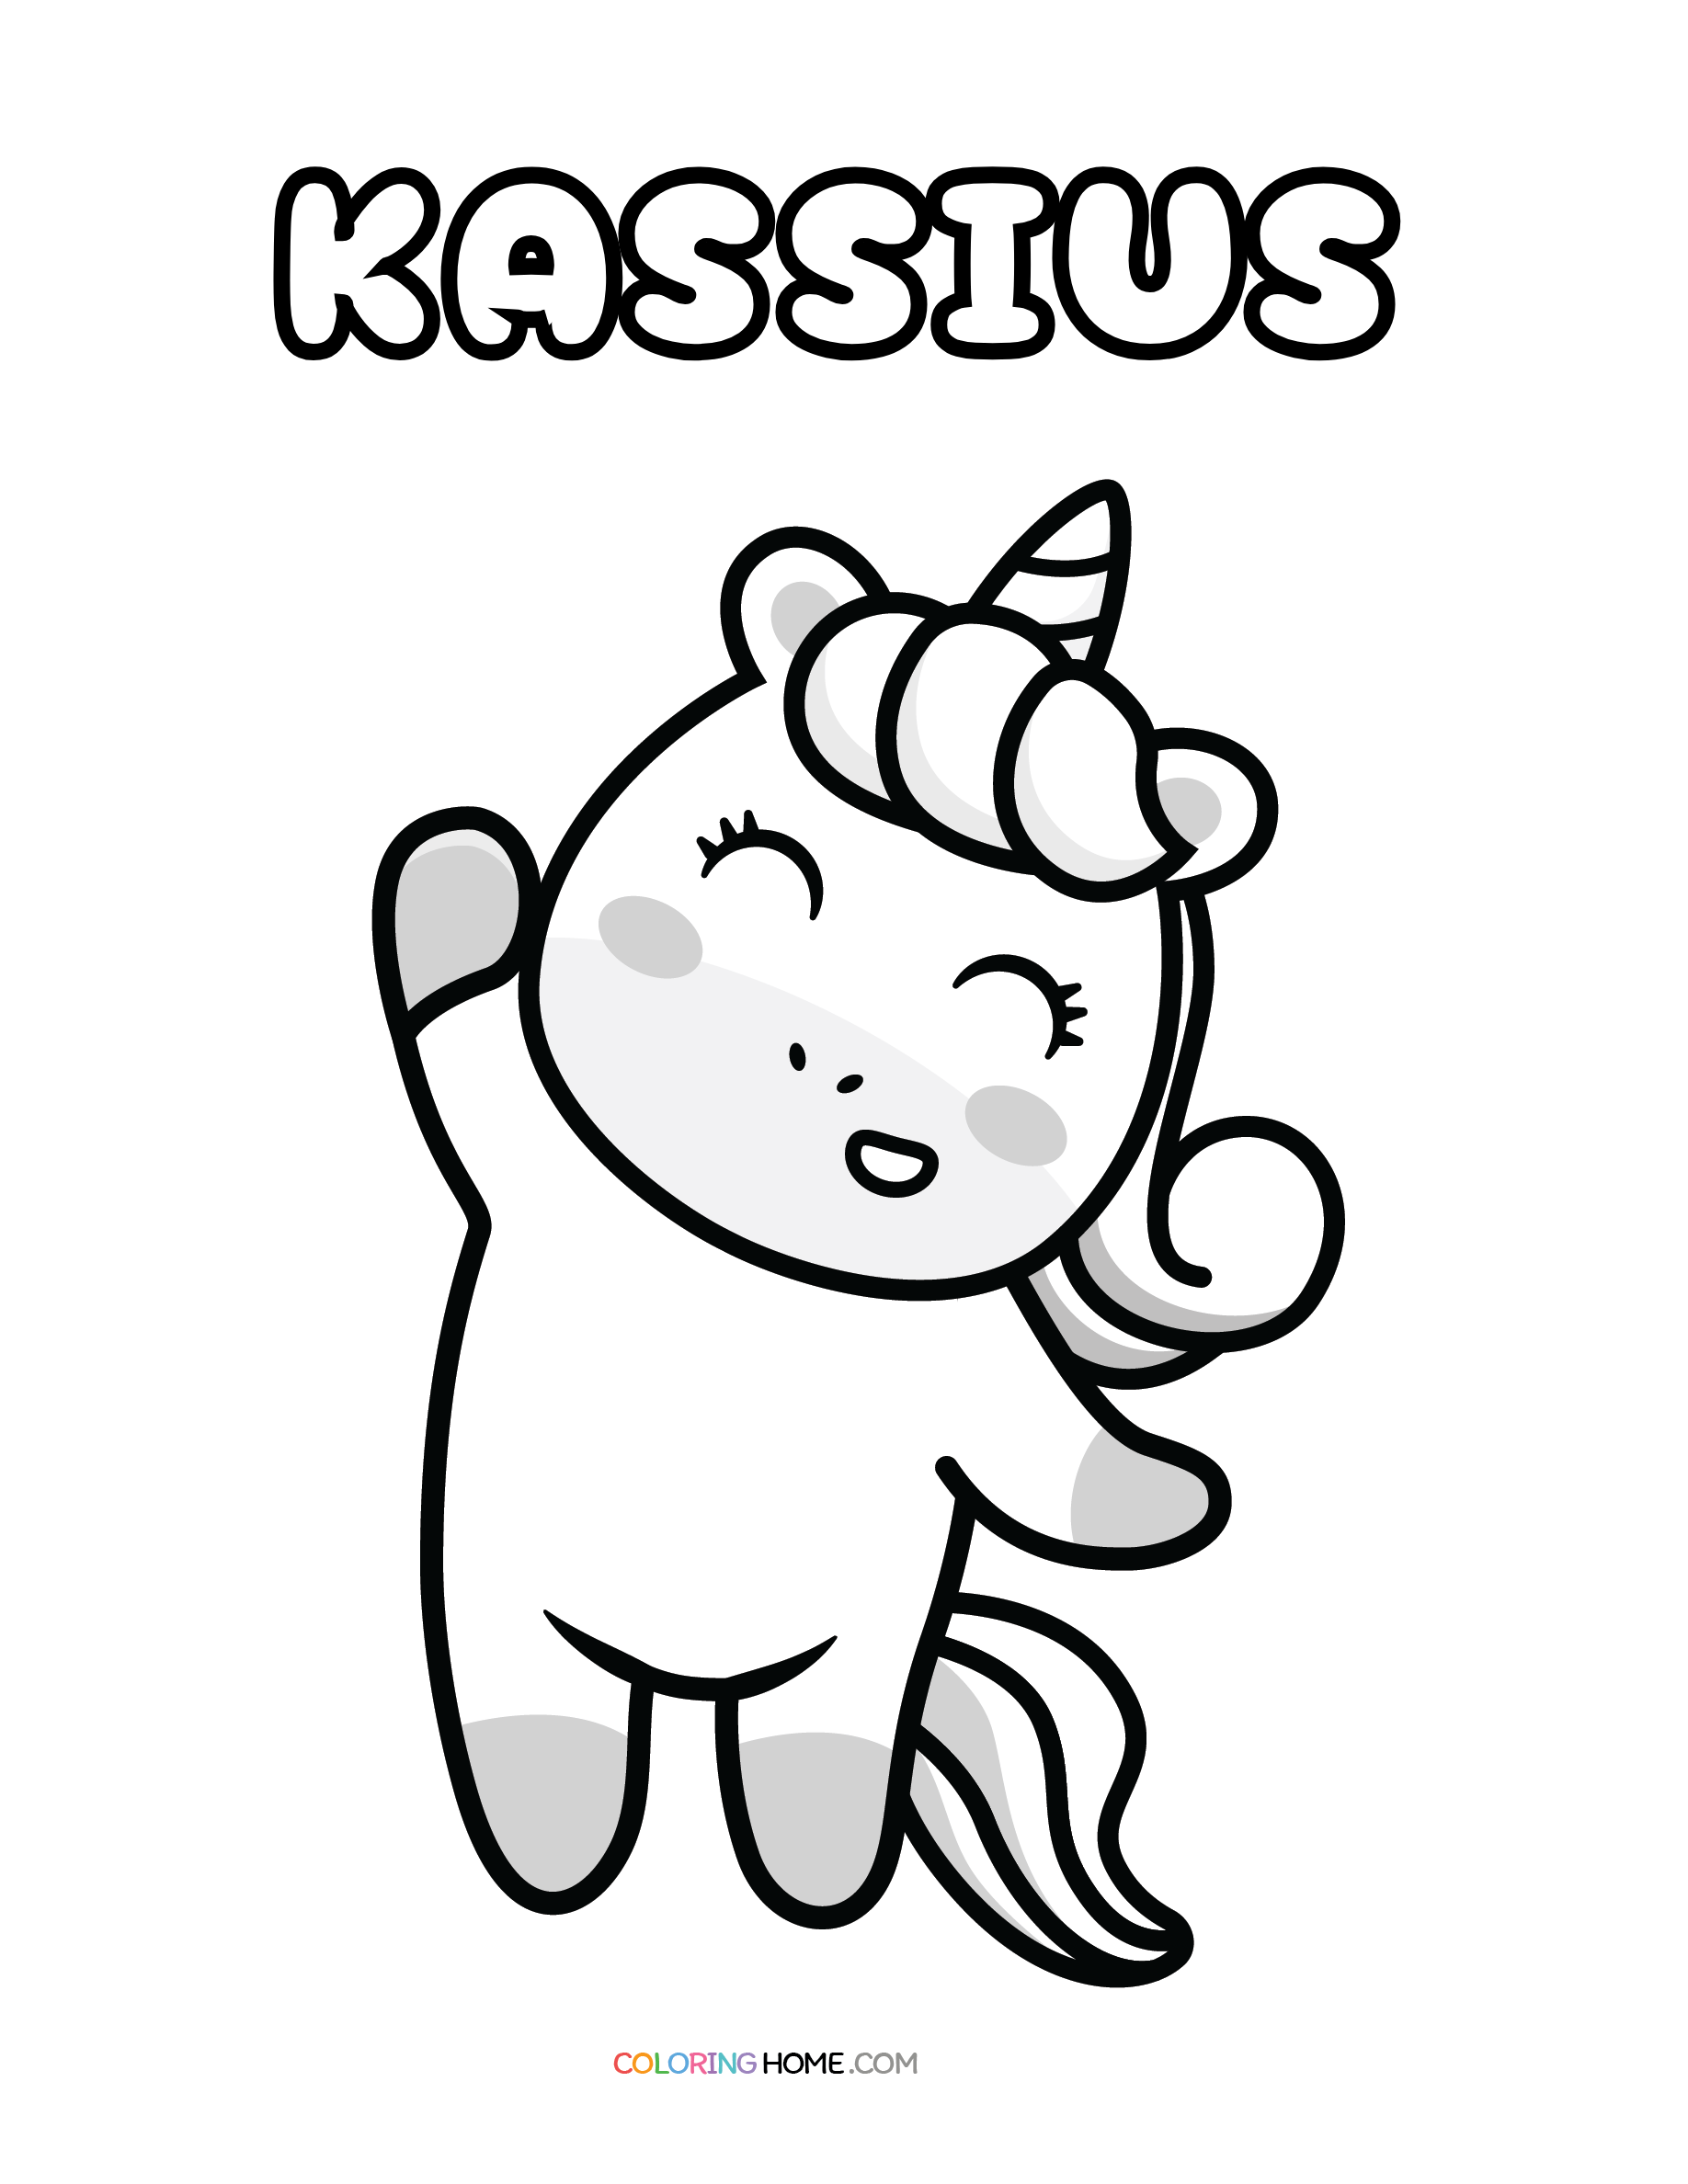 Kassius unicorn coloring page